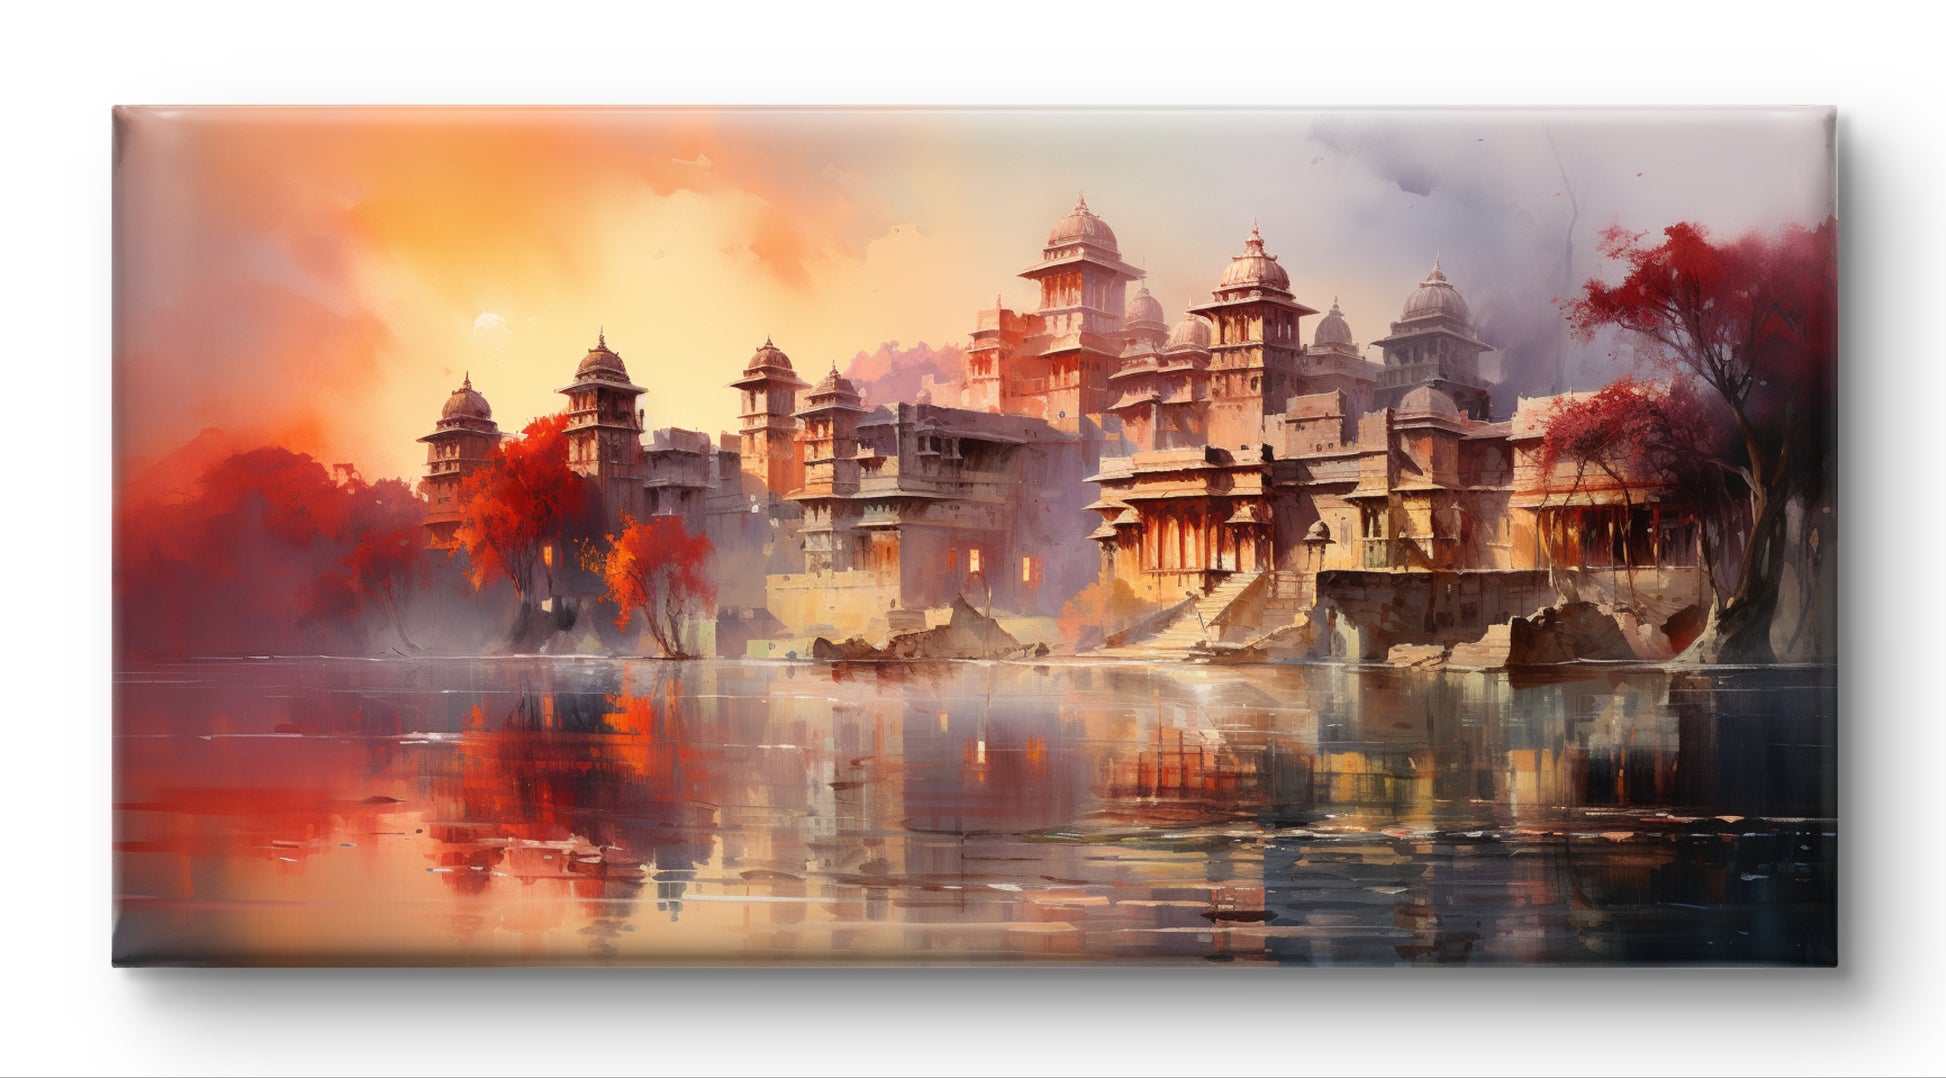 Royal Palace In Rajasthan  Indian Art Landscape Painting